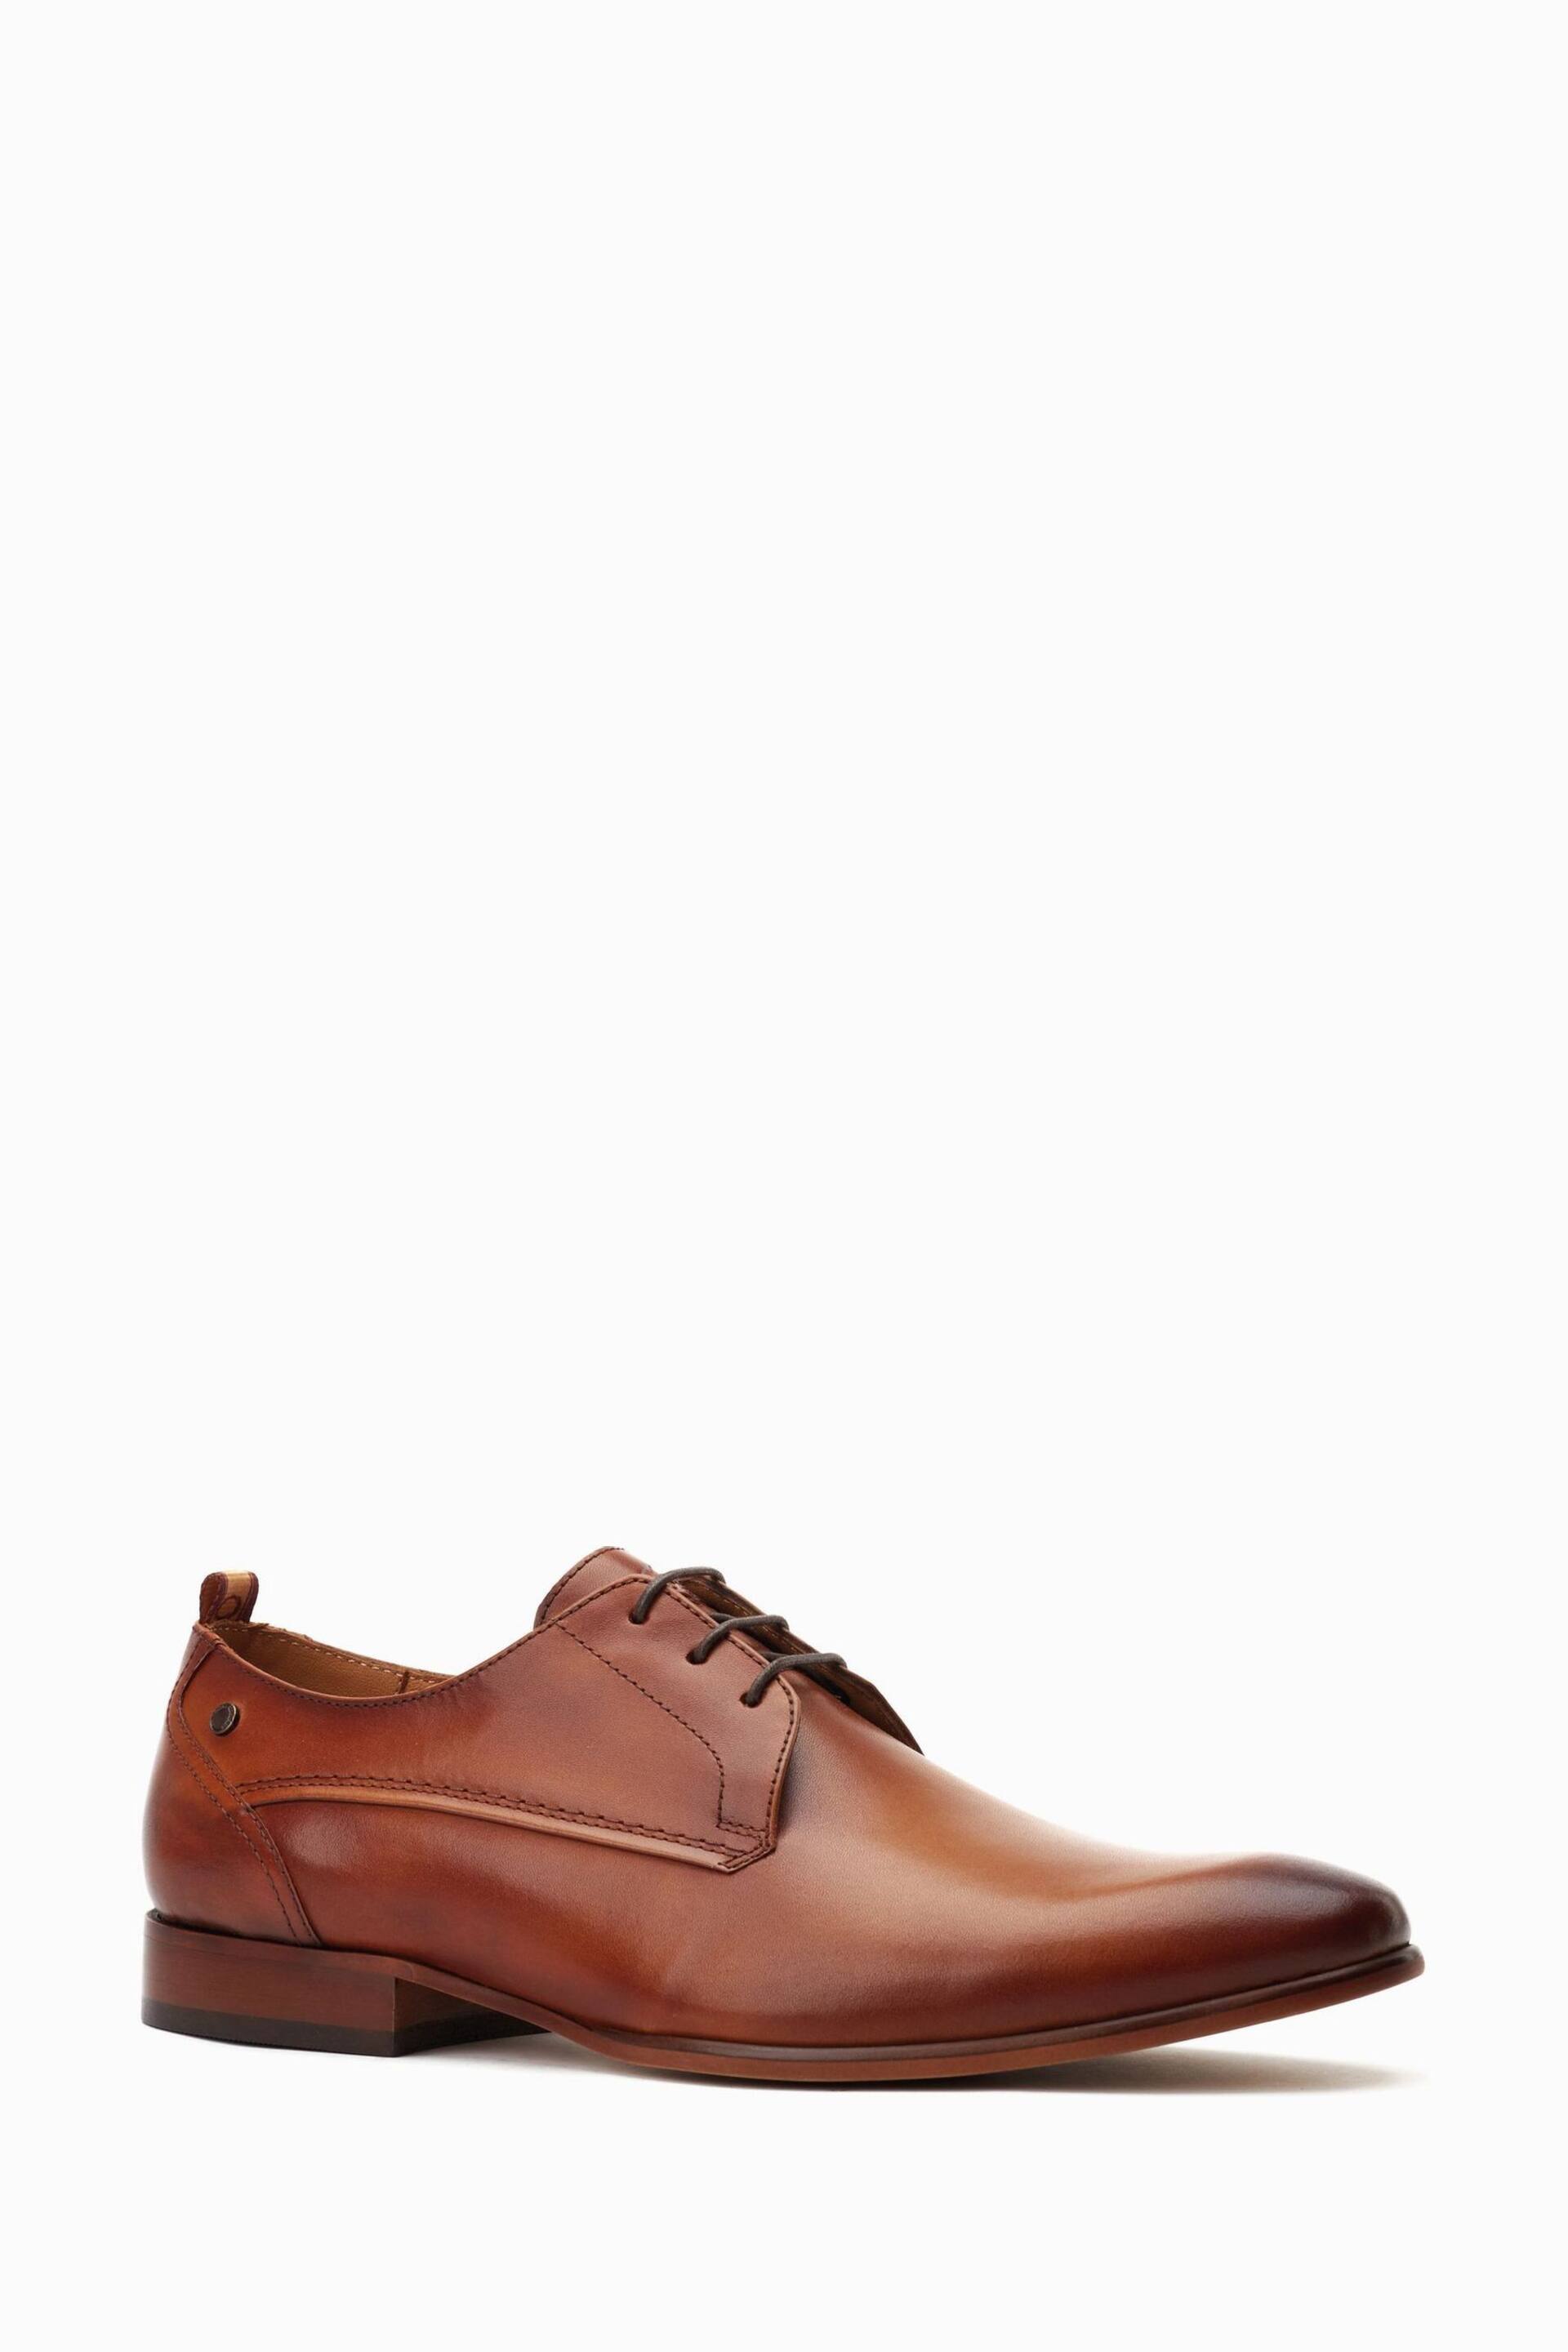 Base London Gambino Lace-Up Derby Shoes - Image 3 of 6